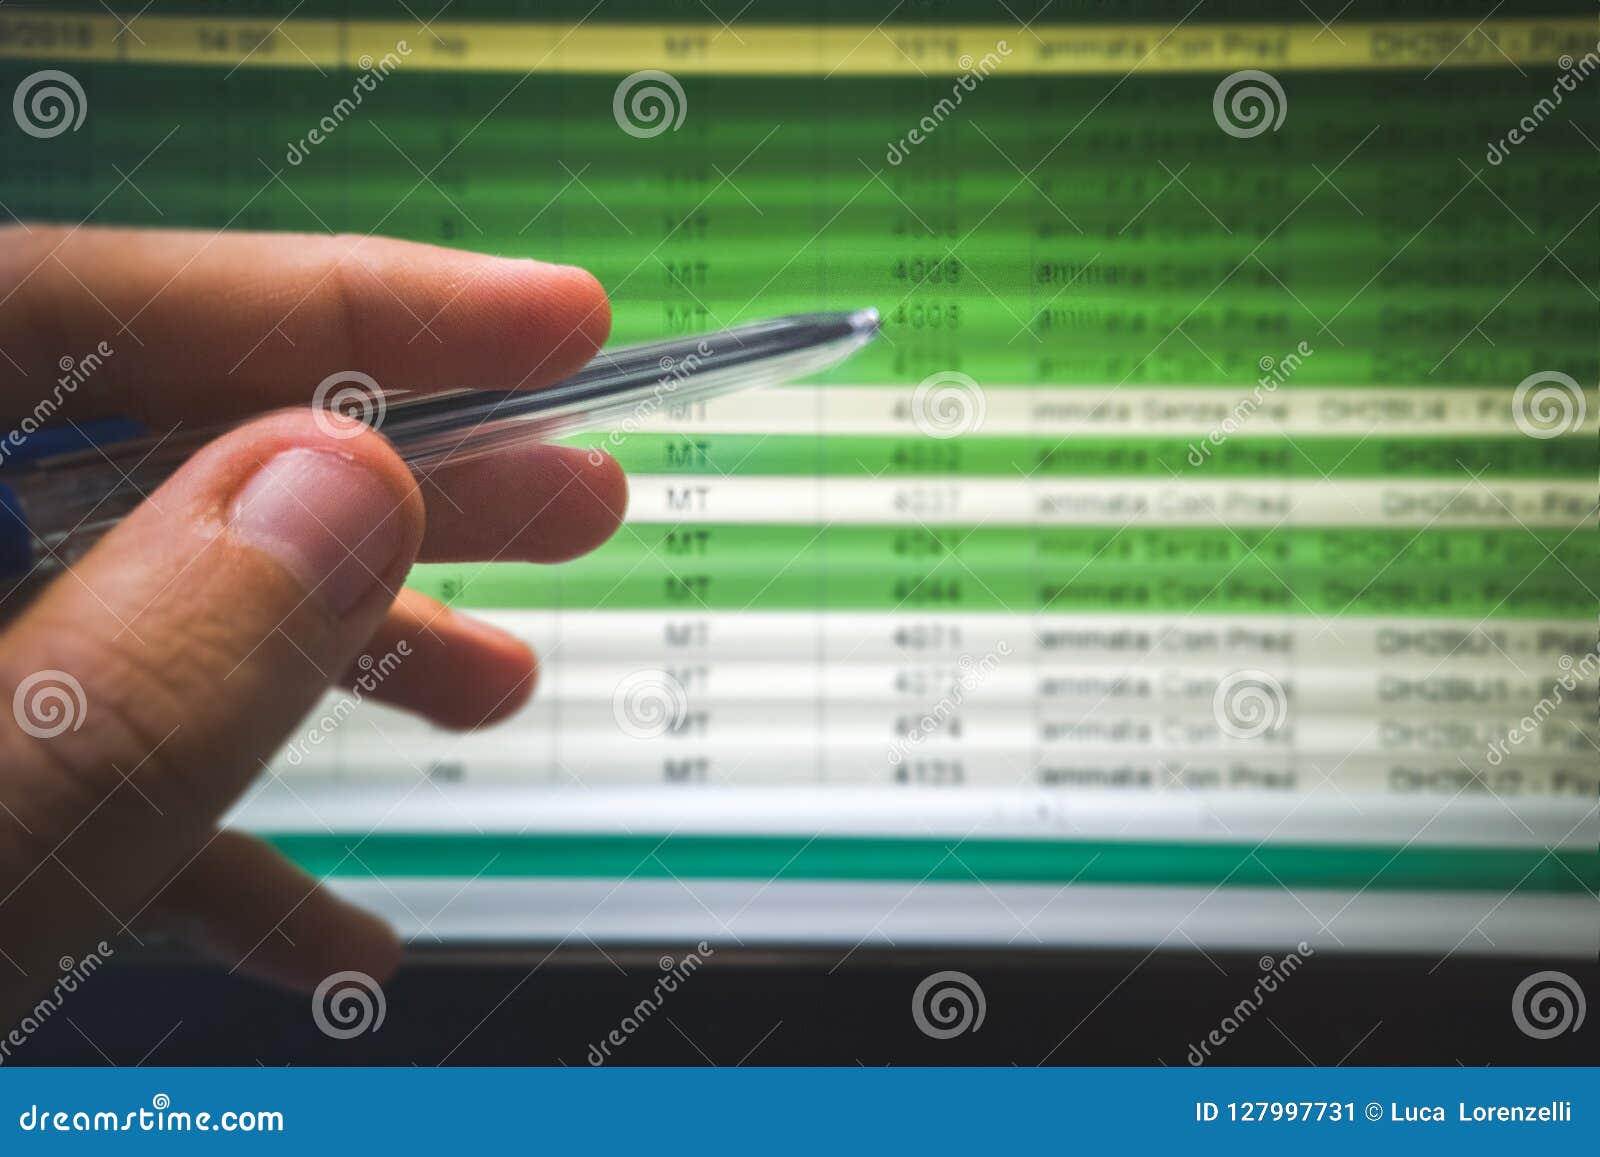 hand indicate spreadsheet on the screen with pen